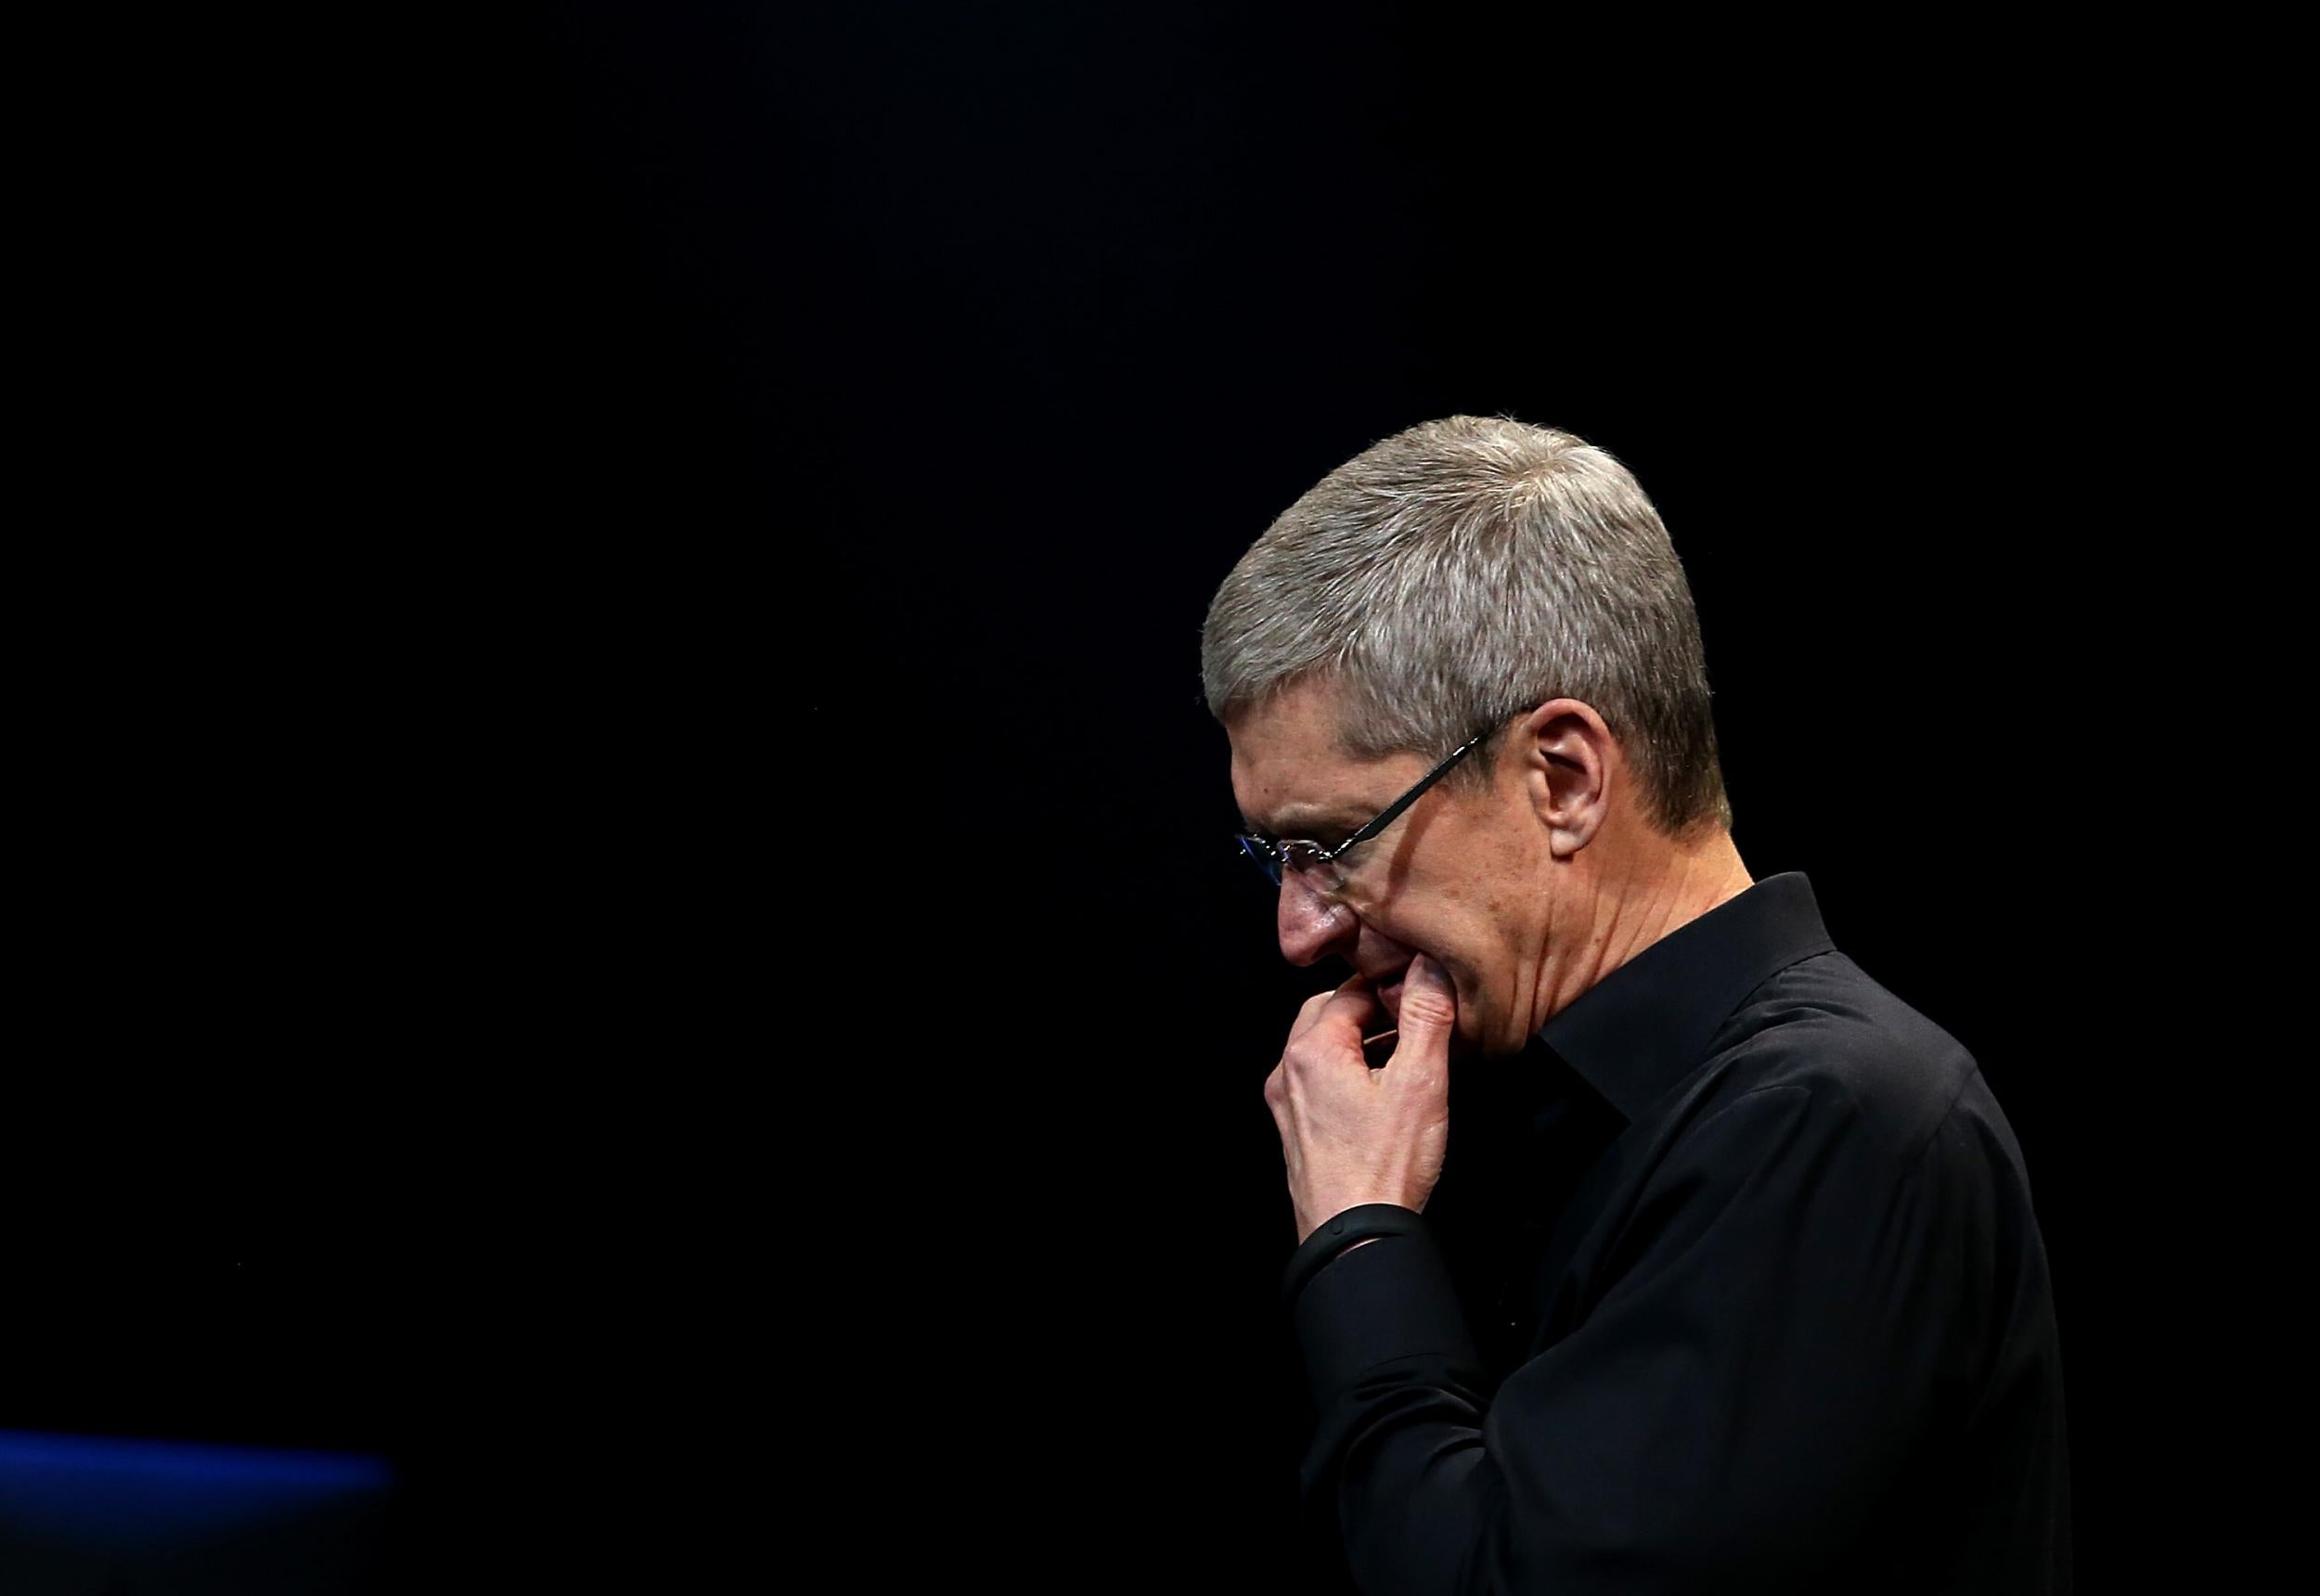 Tim Cook speaks during the Apple announcement of the iPad Air in 2013